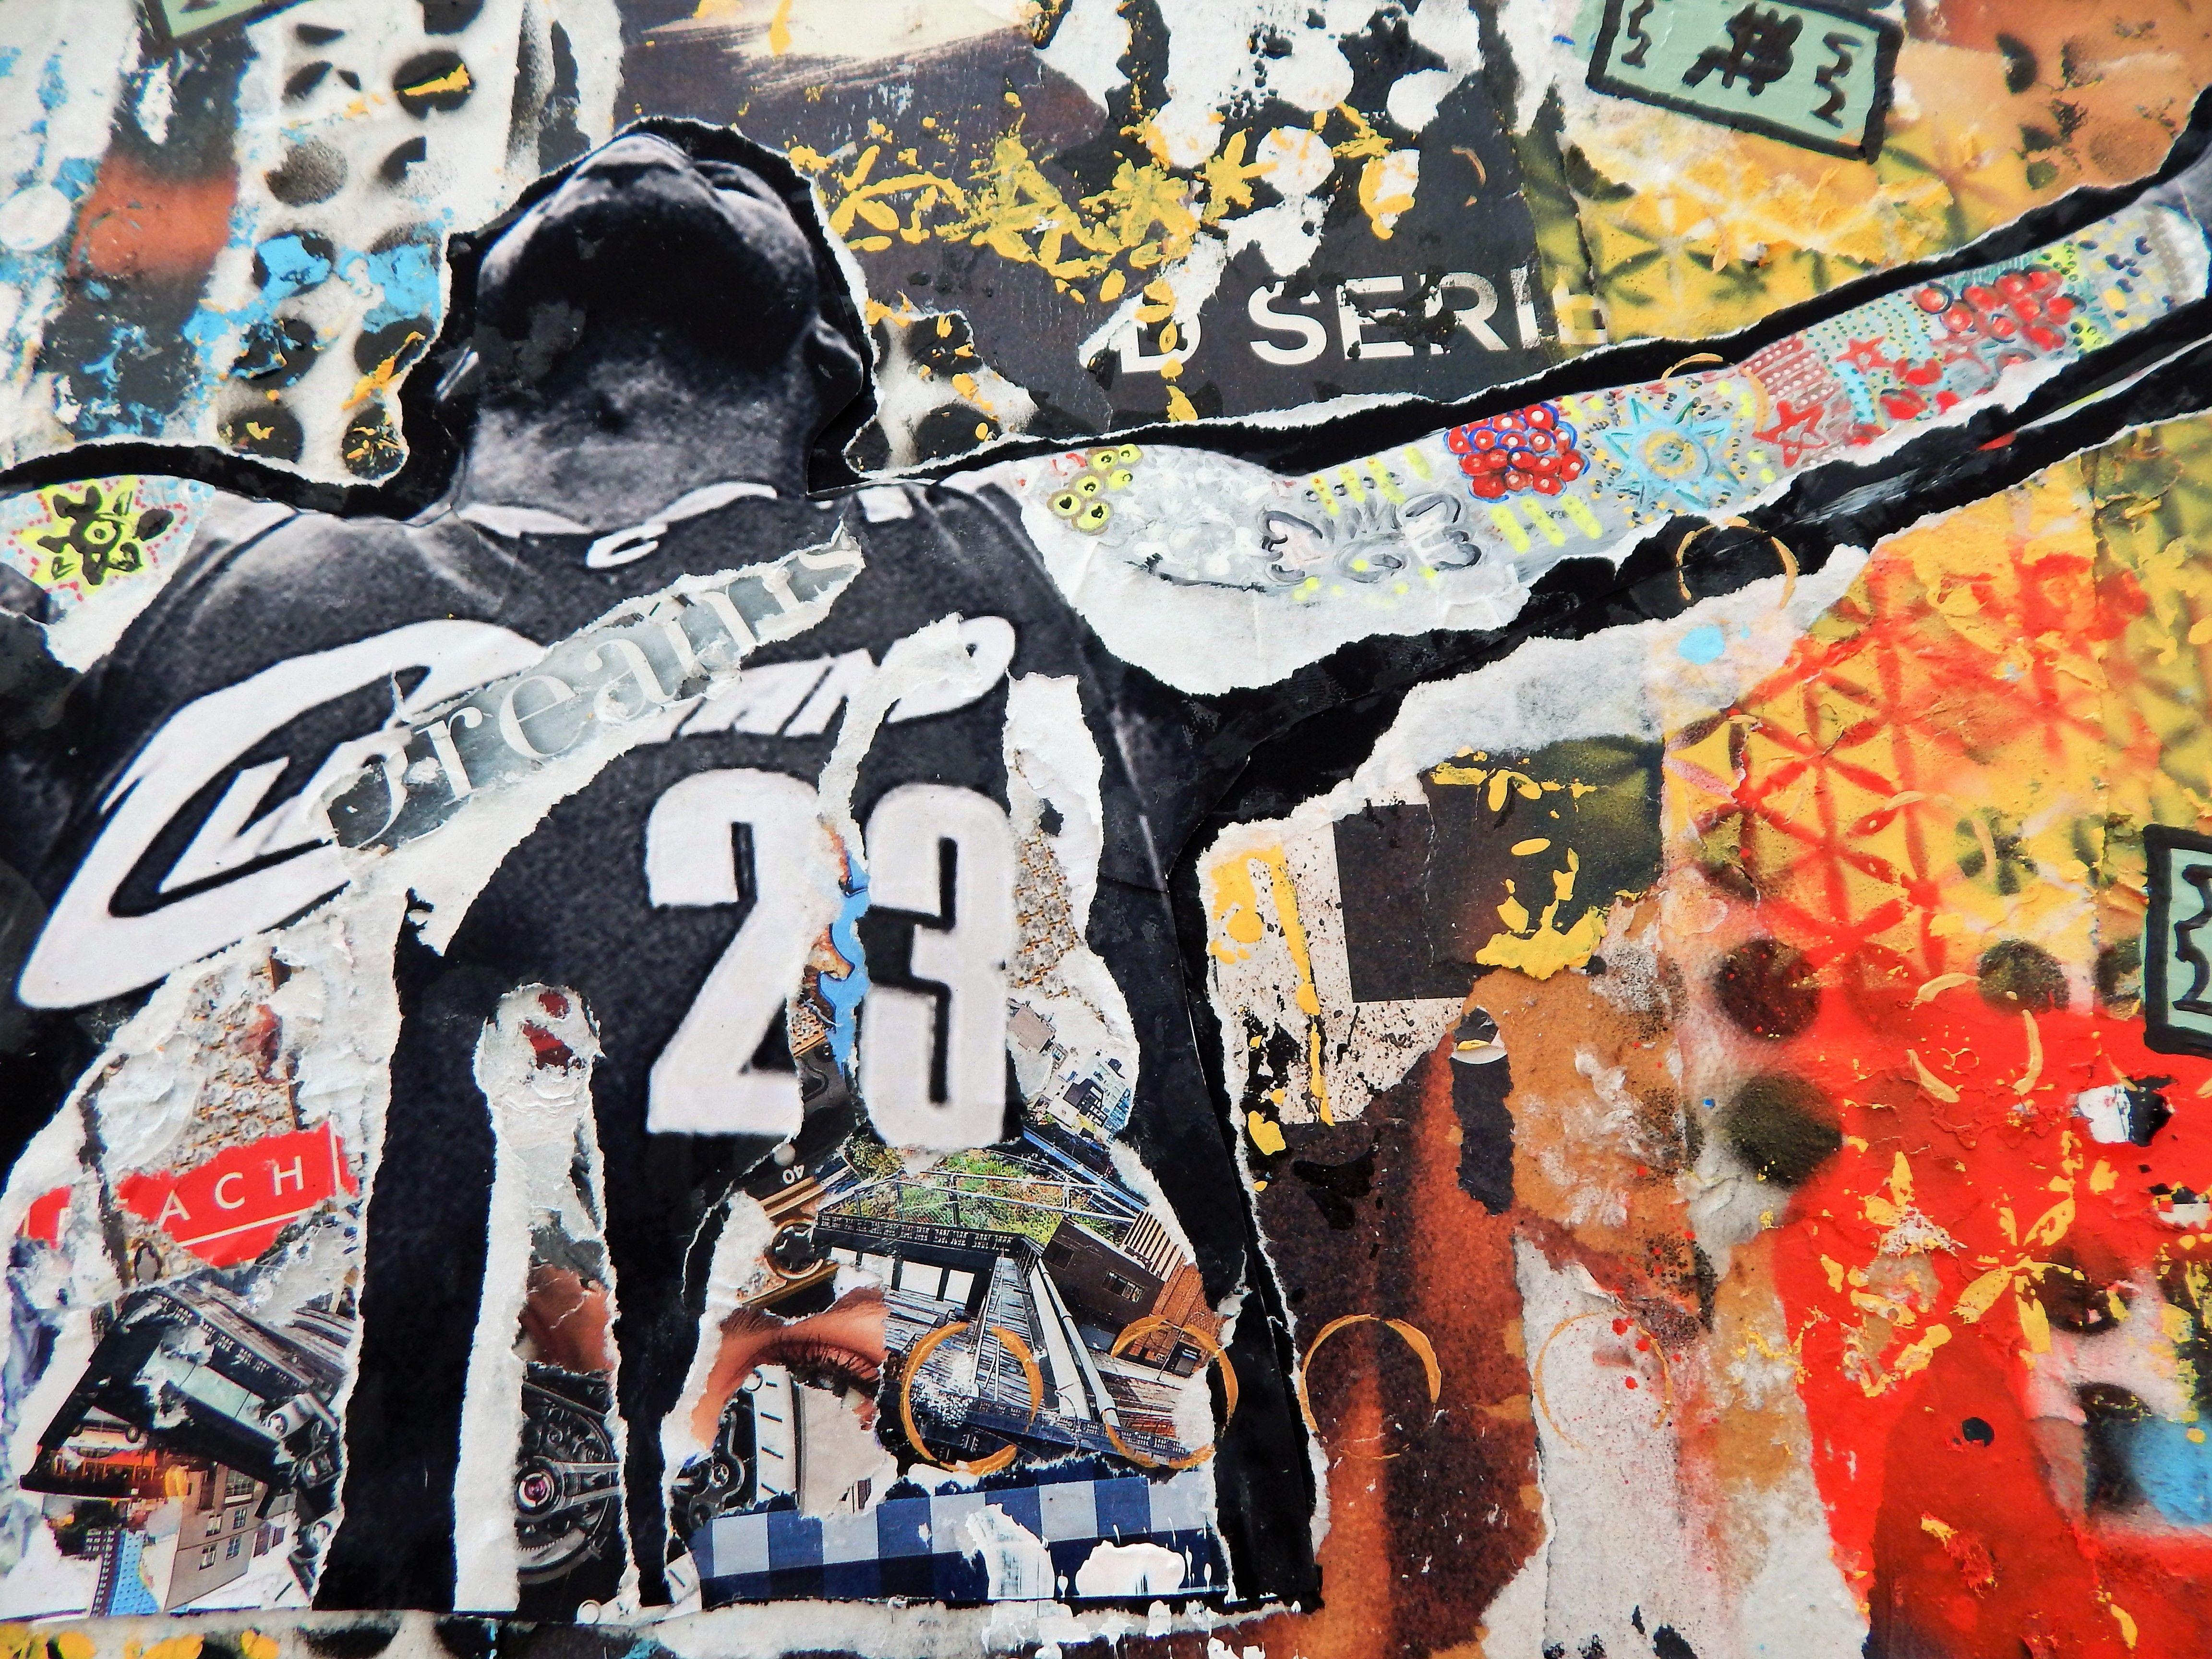 Iconic image of Lebron James pre-game warm up.  Collage materials including street posters from Wynwood Miami, acrylics, spray paints on wood board and resin cover.  Mixed media on wood and resin finish   :: Mixed Media :: Pop-Art :: This piece